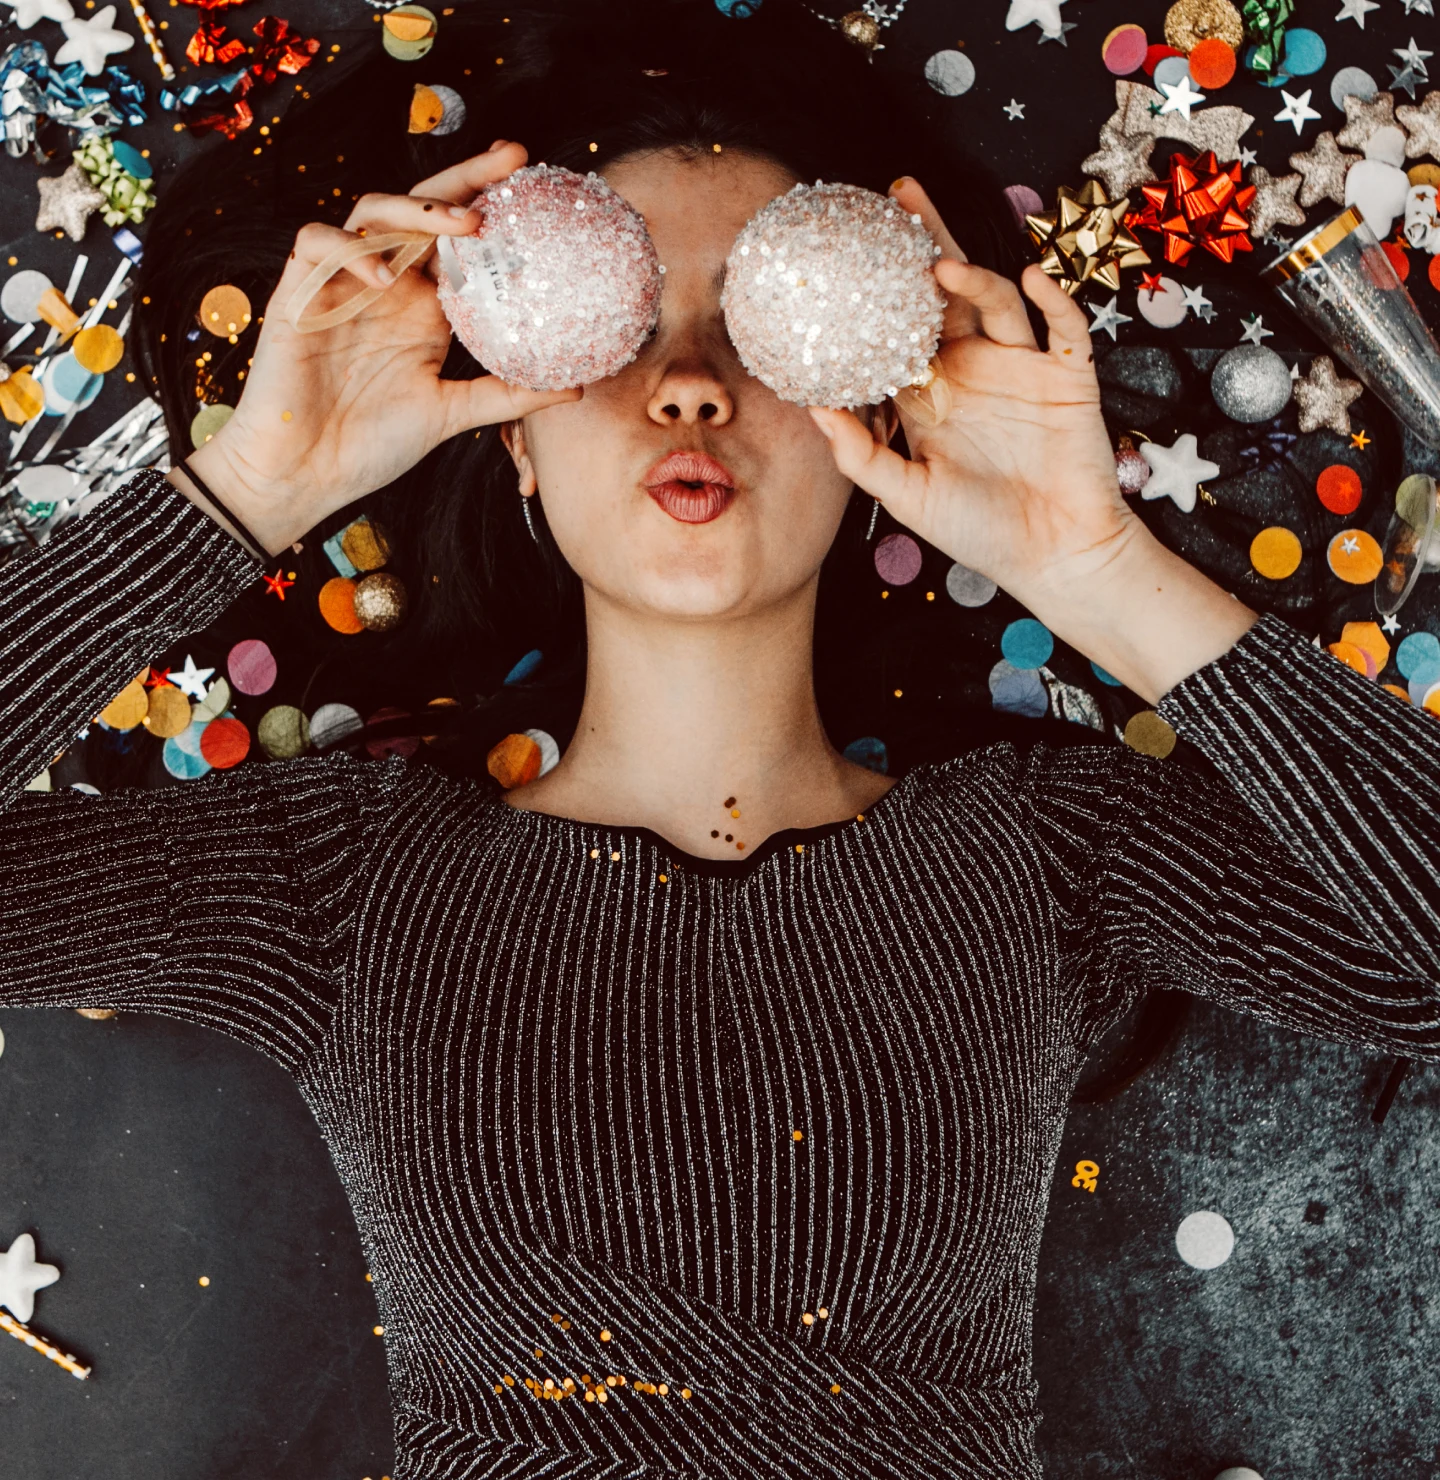 Image of a woman laying on the ground, with two small disco balls covering her eyes and her lips pursed. Confetti covers the ground around her, and she's wearing a long-sleeved sparkly shirt. 